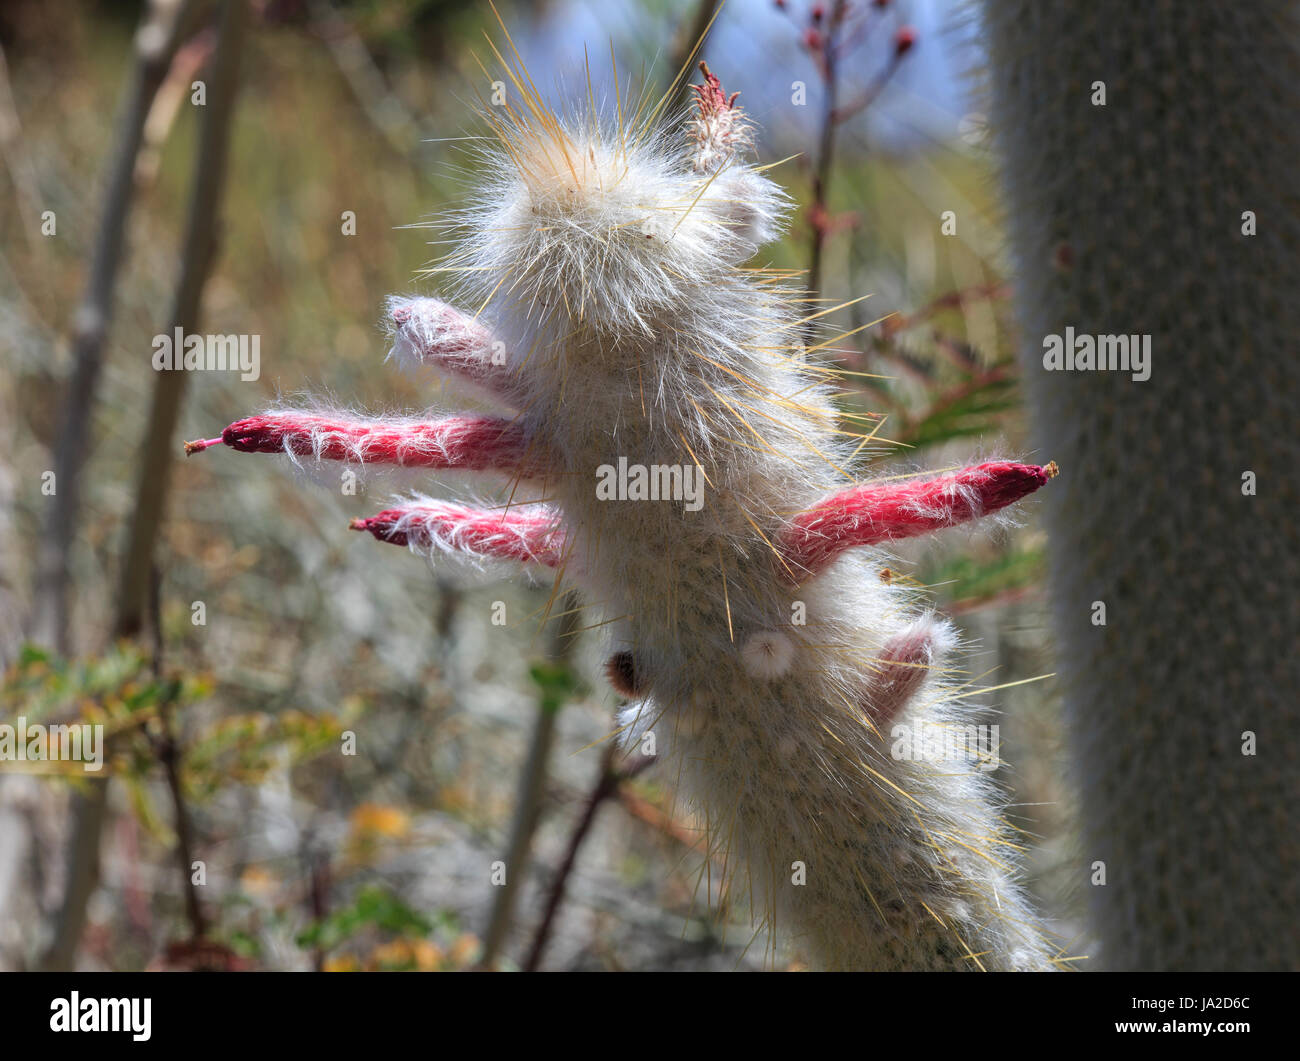 Silver torch cactus (Cleistocactus strausii) with old flowers Stock Photo